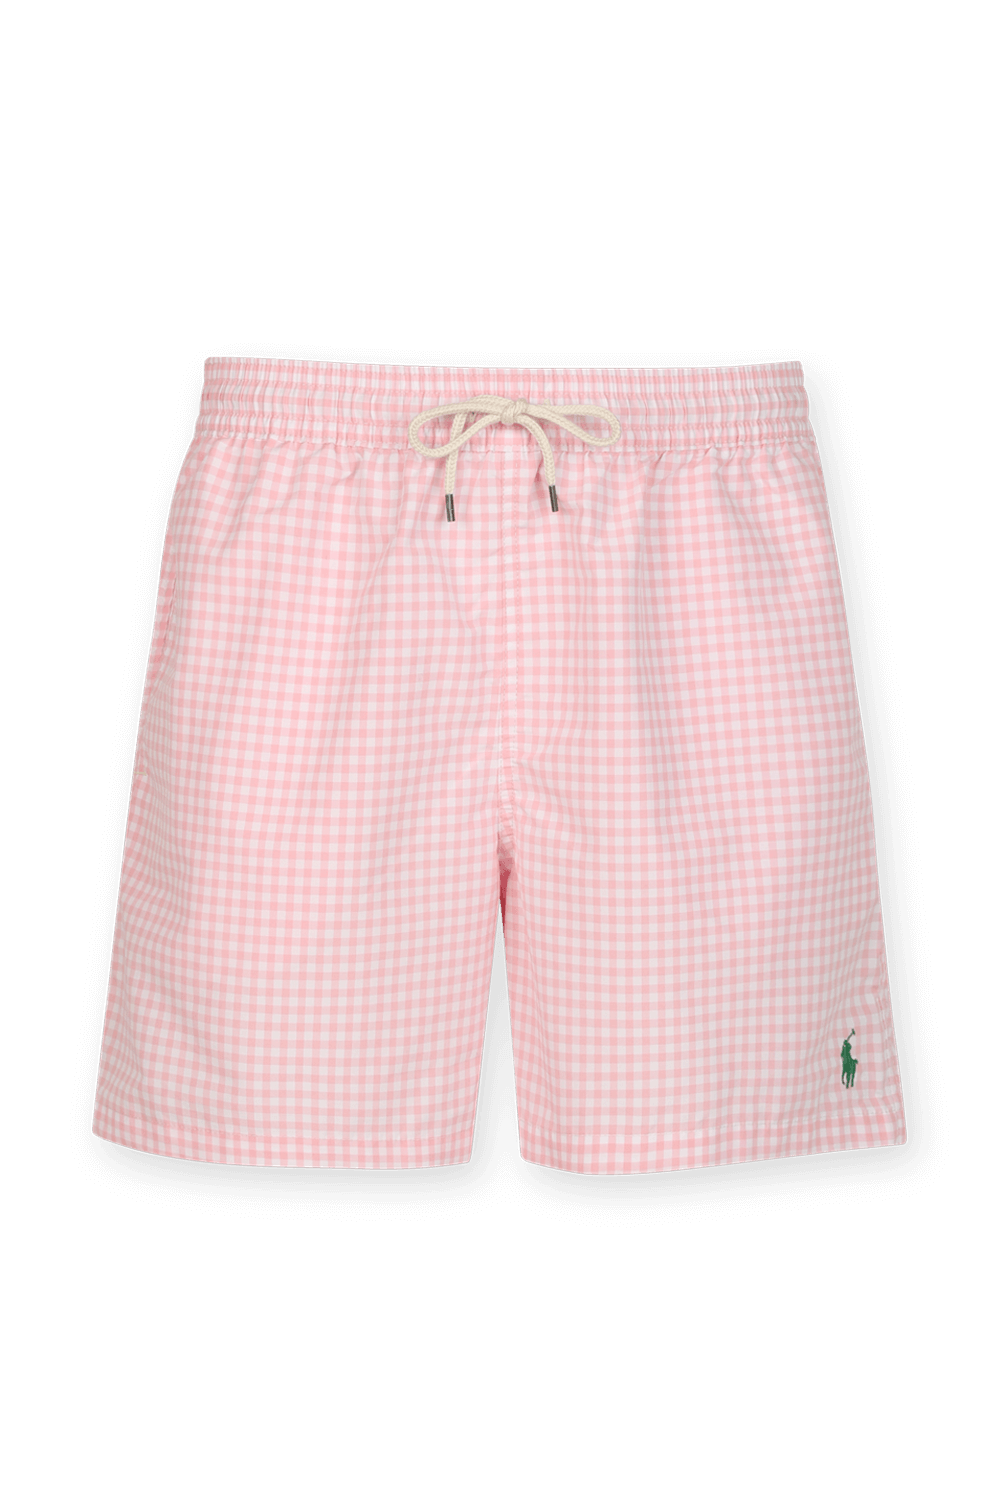 Plaid Swim Trunk in Pink and White POLO RALPH LAUREN